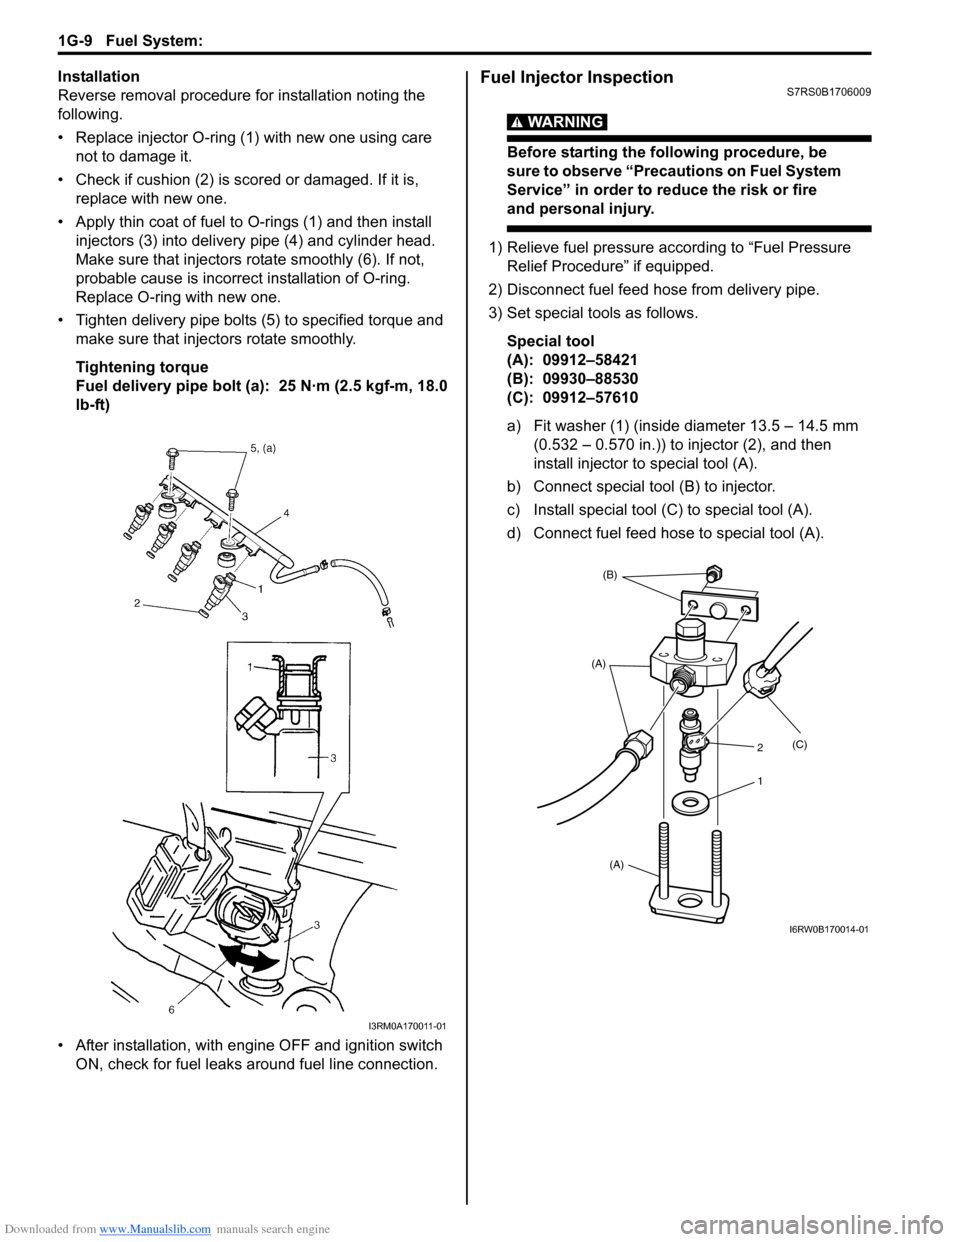 SUZUKI SWIFT 2006 2.G Service User Guide Downloaded from www.Manualslib.com manuals search engine 1G-9 Fuel System: 
Installation
Reverse removal procedure for installation noting the 
following.
• Replace injector O-ring (1) with new one 